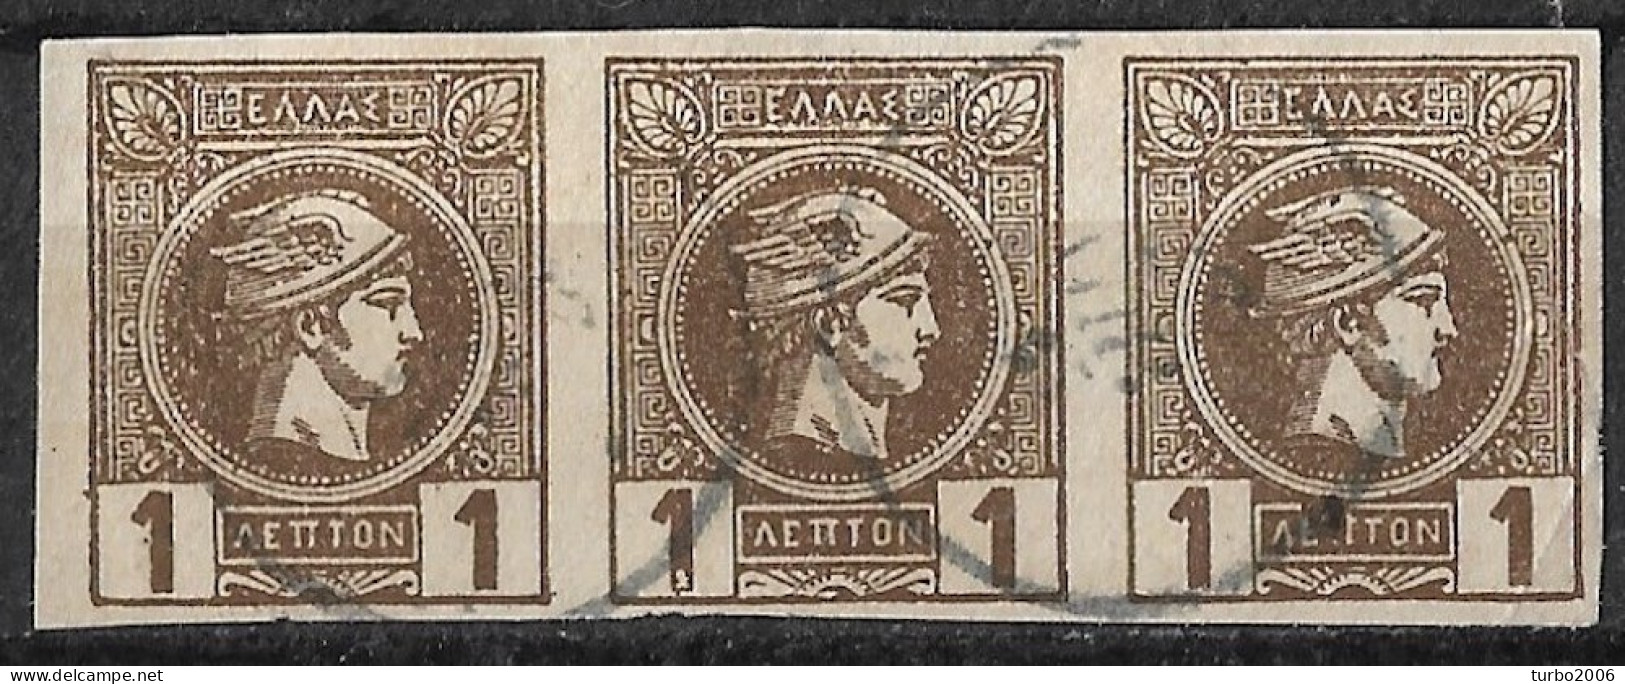 GREECE 1889-1891 Small Hermes Heads Athens Print 1 L Brown Imperforated Strip Of 3 Vl. 88 (white Dot In Middle Stamp) - Gebraucht